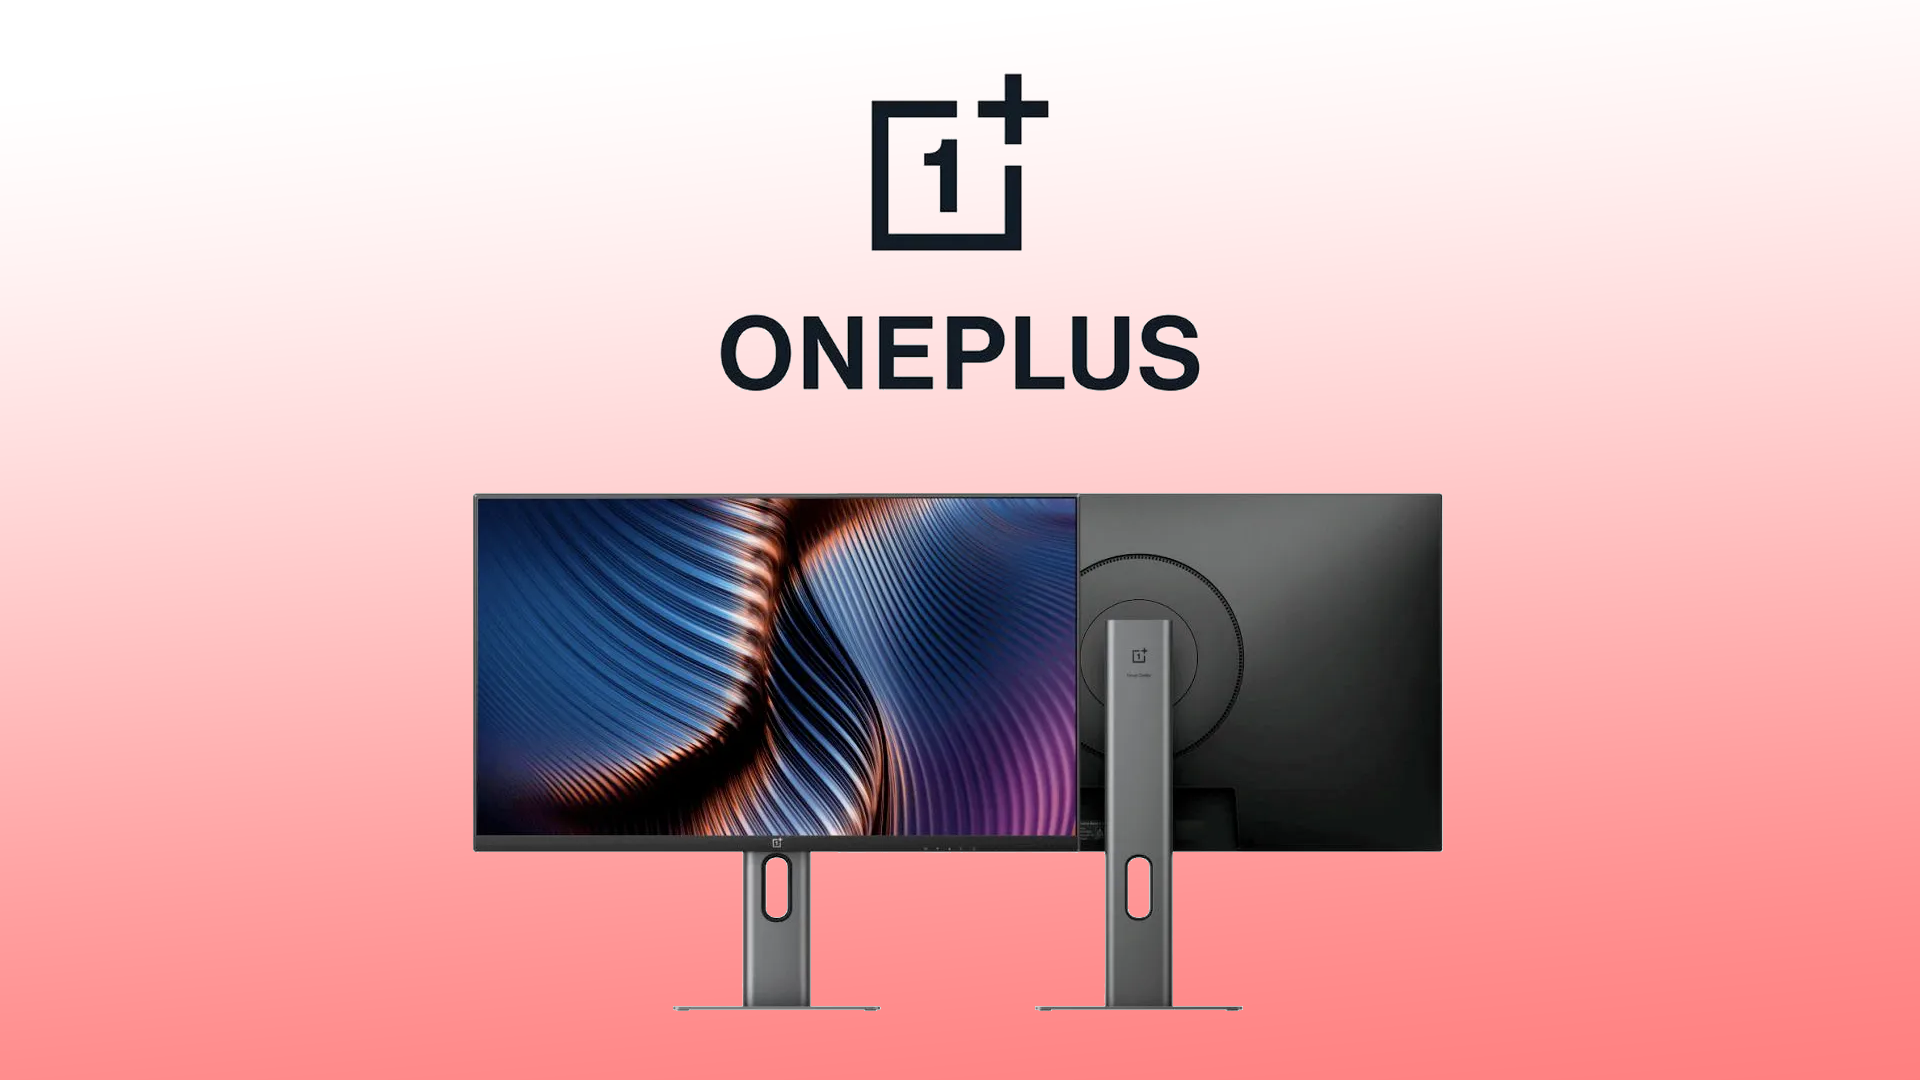 OnePlus officially unveiled its first X 27 and E 24 monitors